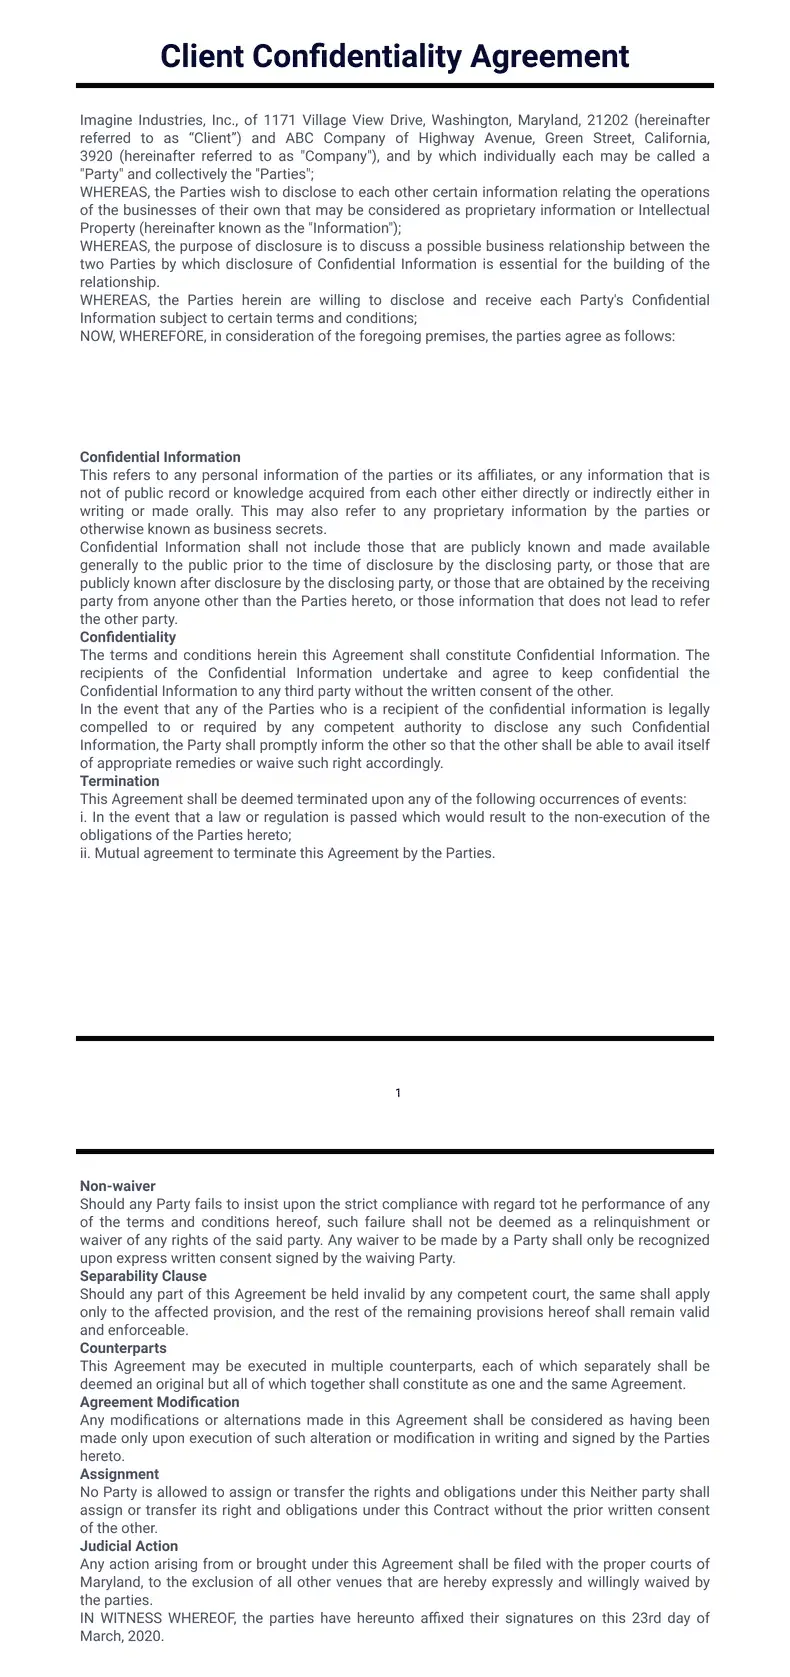 Client Confidentiality Agreement